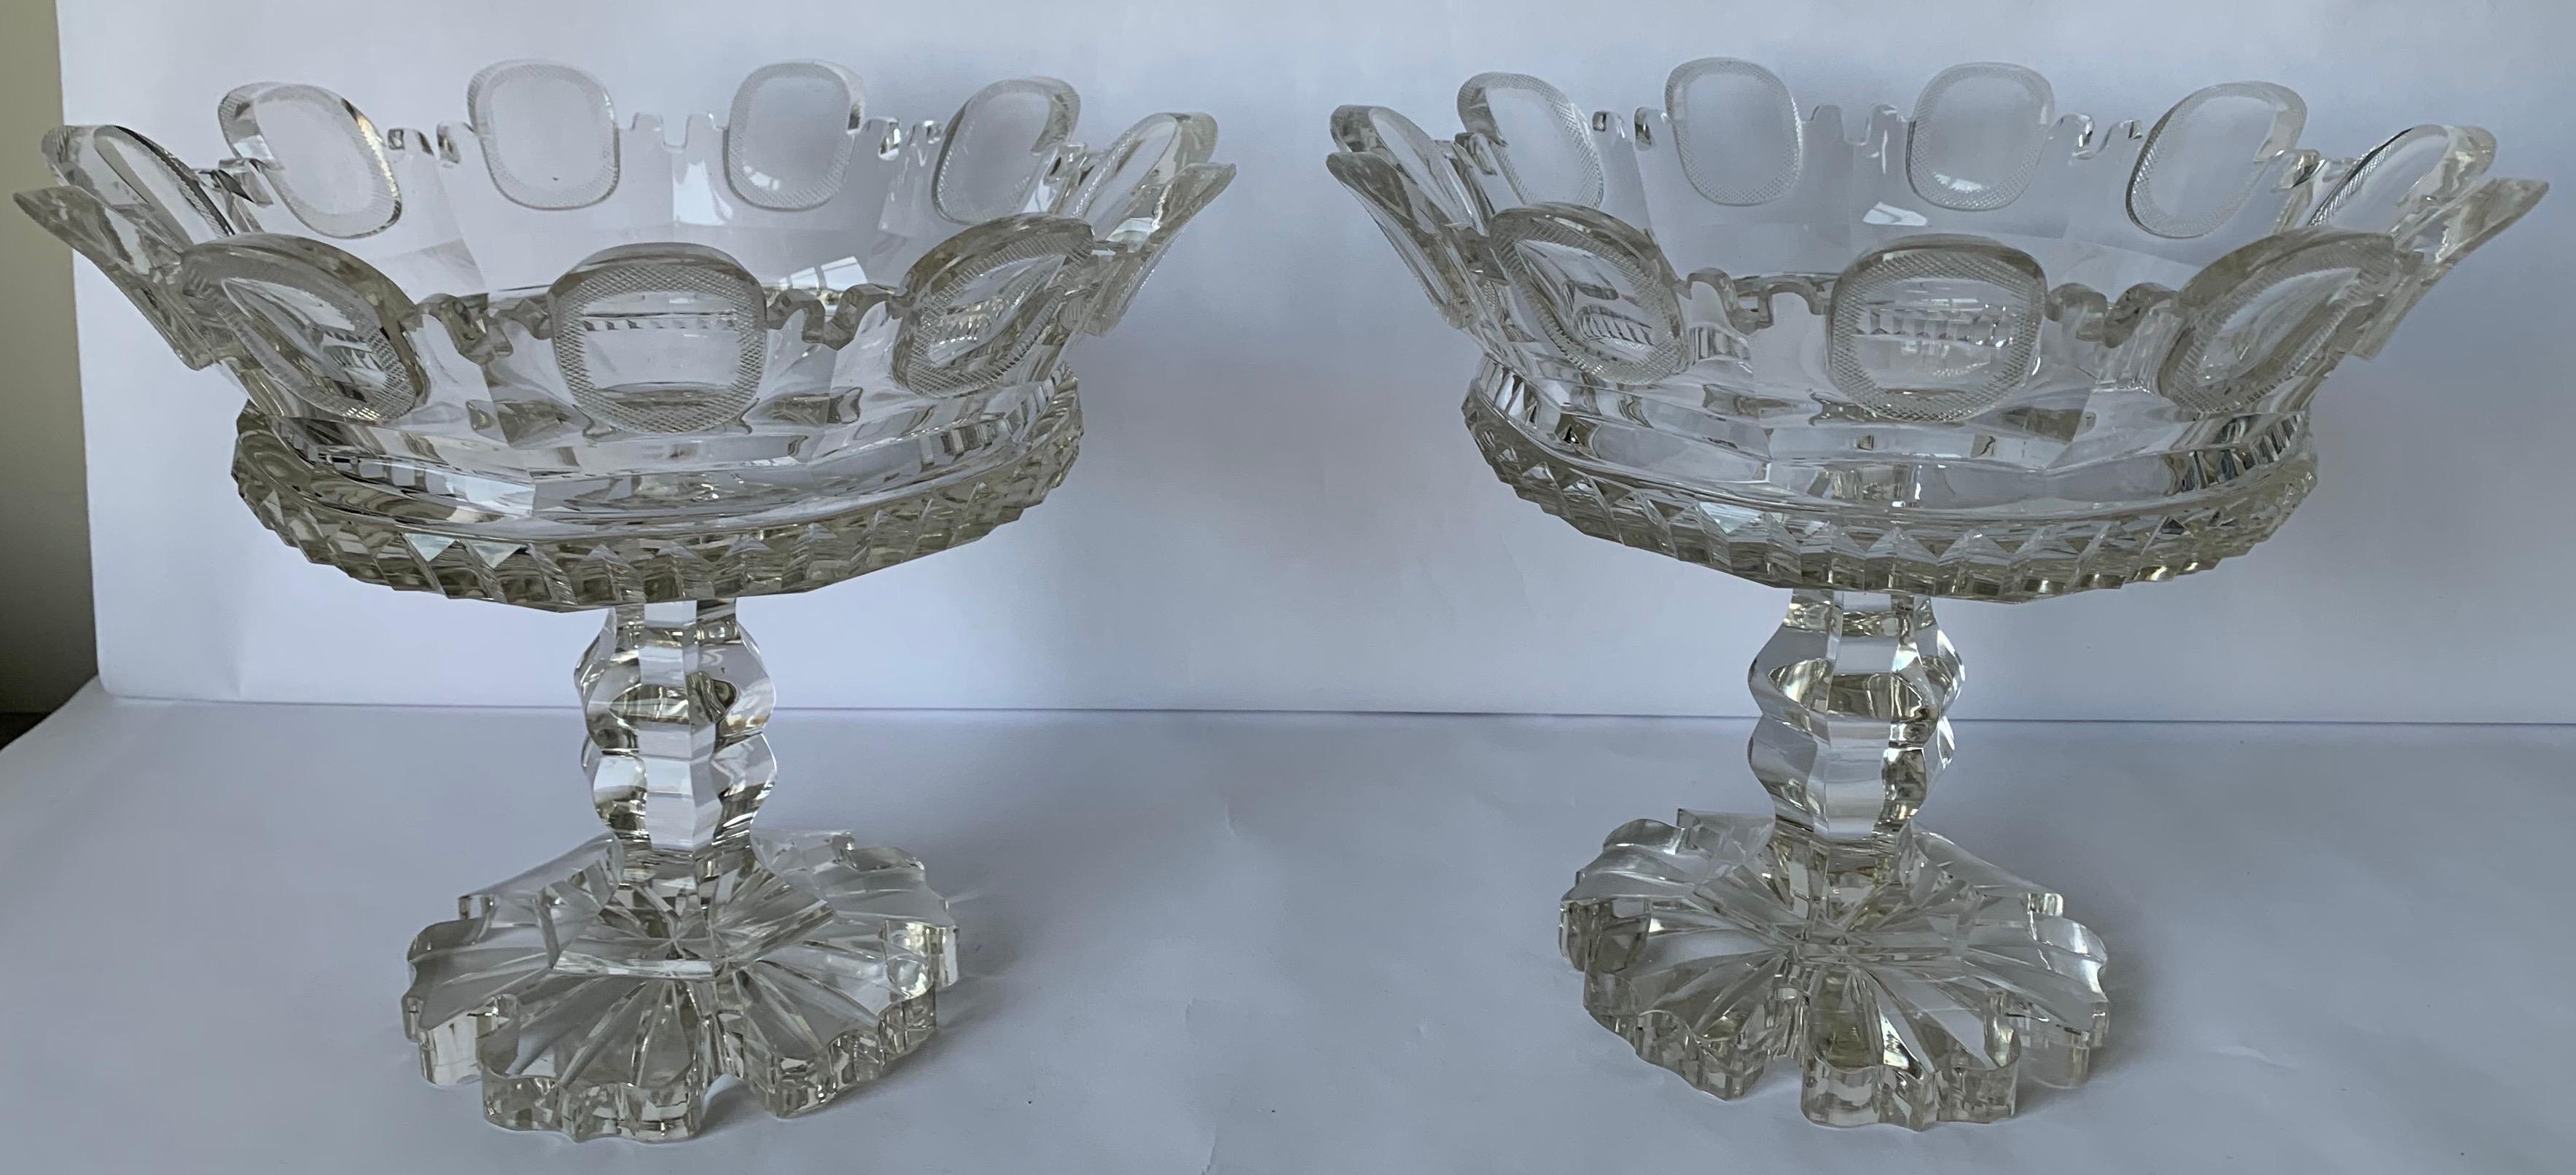 Pair of 1820s Cut Crystal Mantle Vases In Good Condition For Sale In Stamford, CT